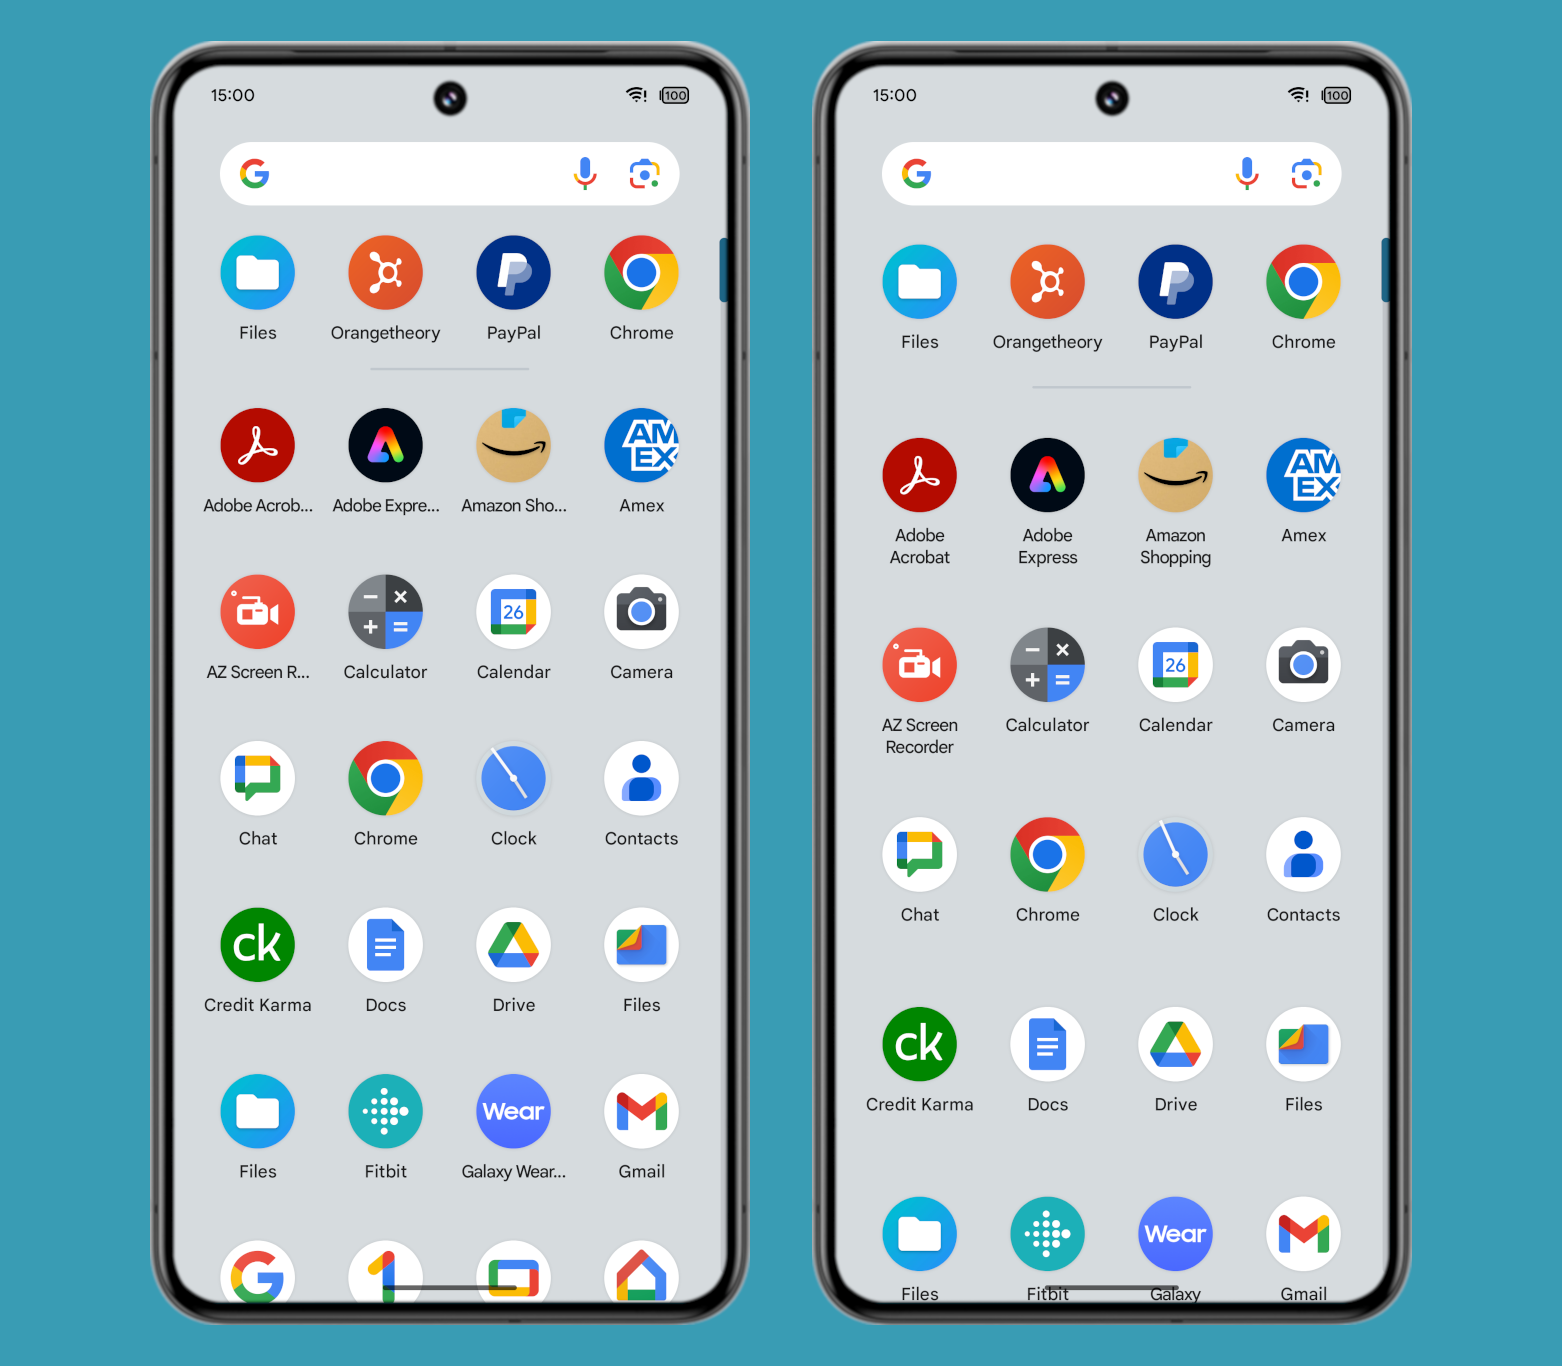 Pixel Launcher will soon let you choose whether to truncate app names